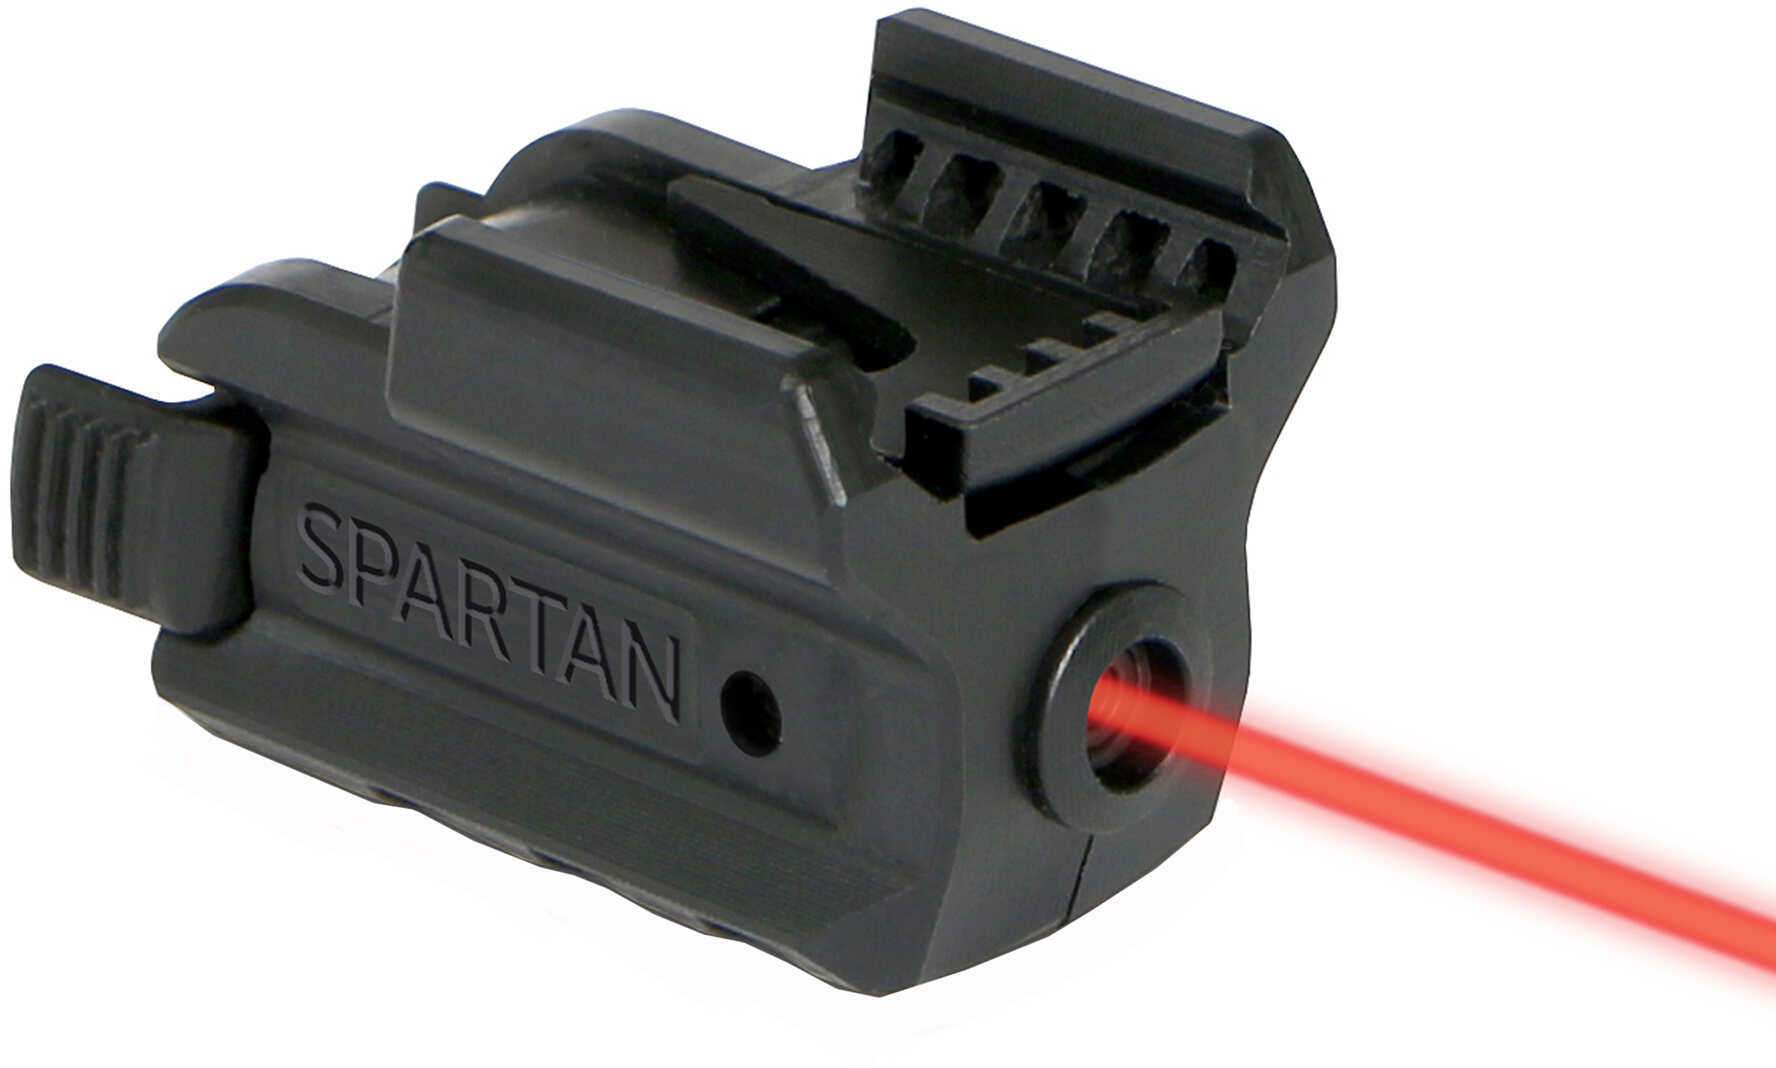 LaserMax Spartan Red Fits Picatinny Black Finish Adjustable with Battery SPS-R